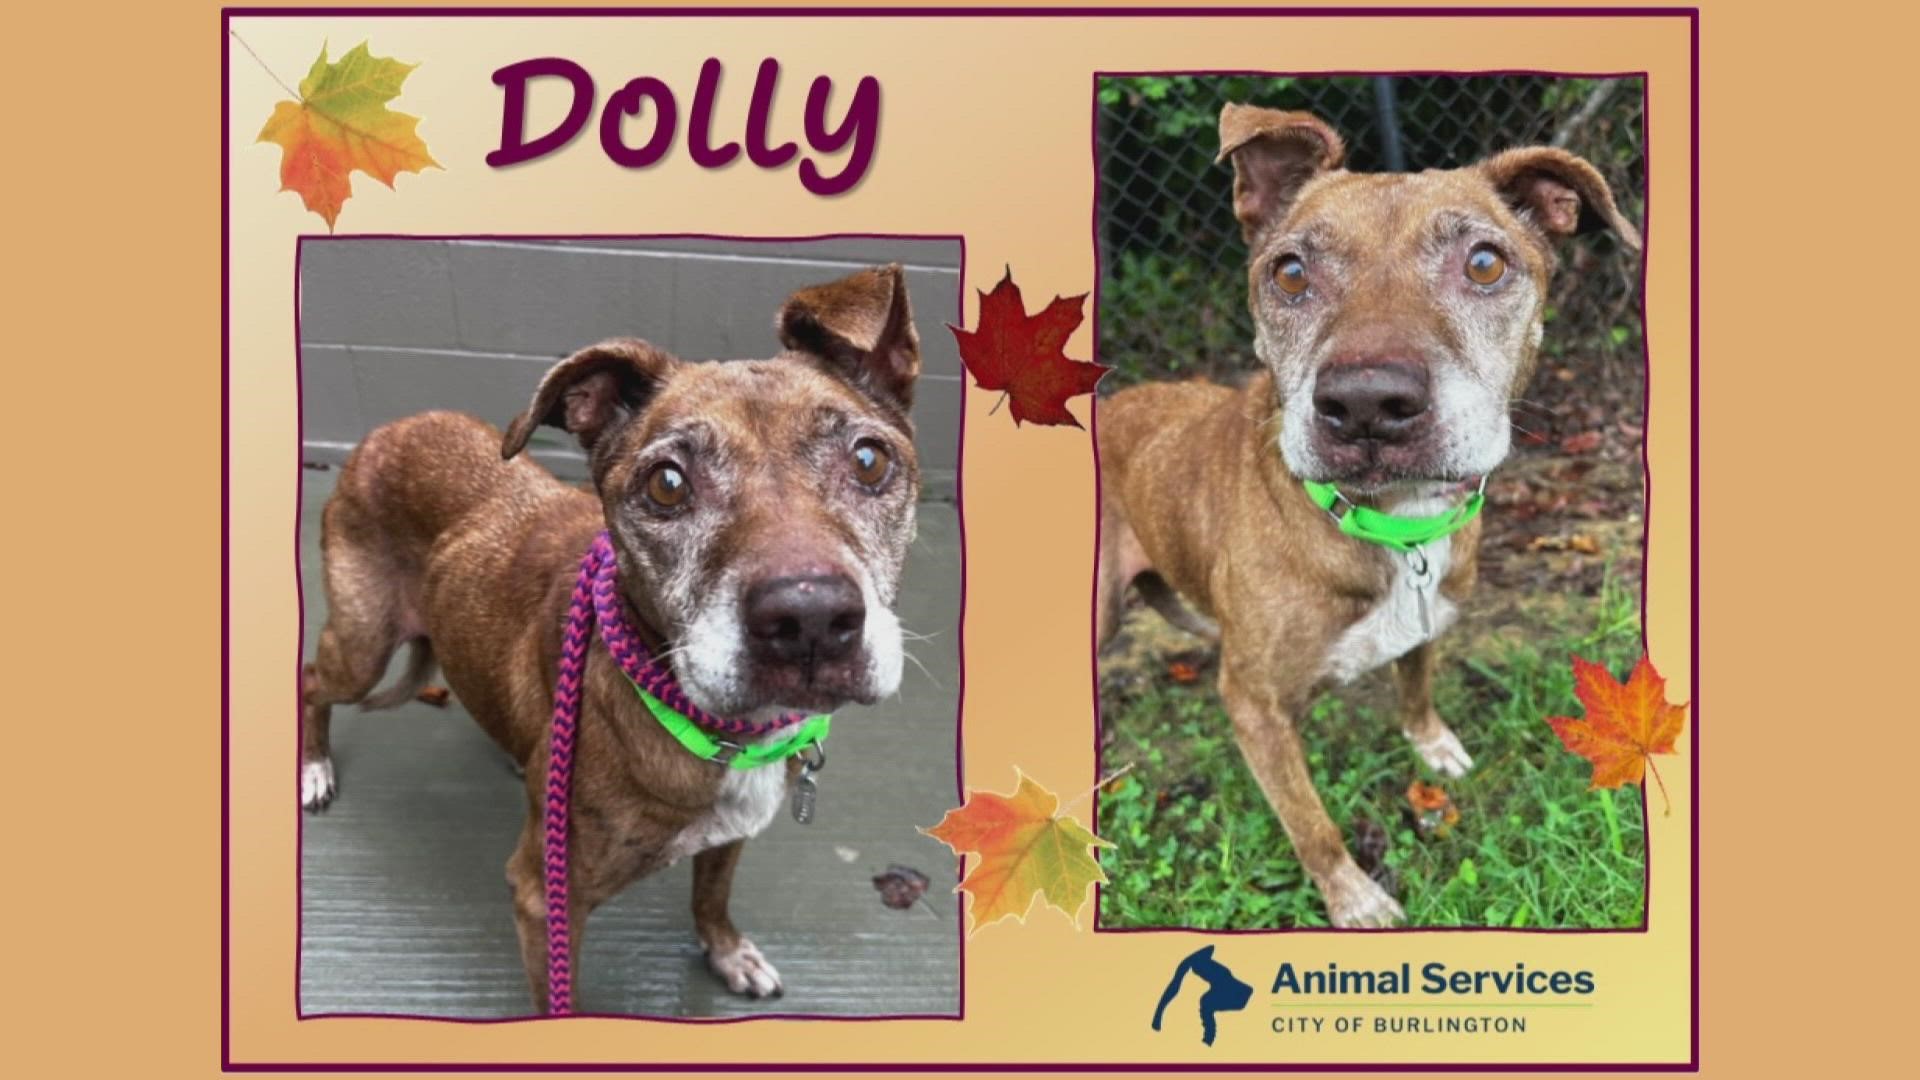 Let's get Dolly adopted!